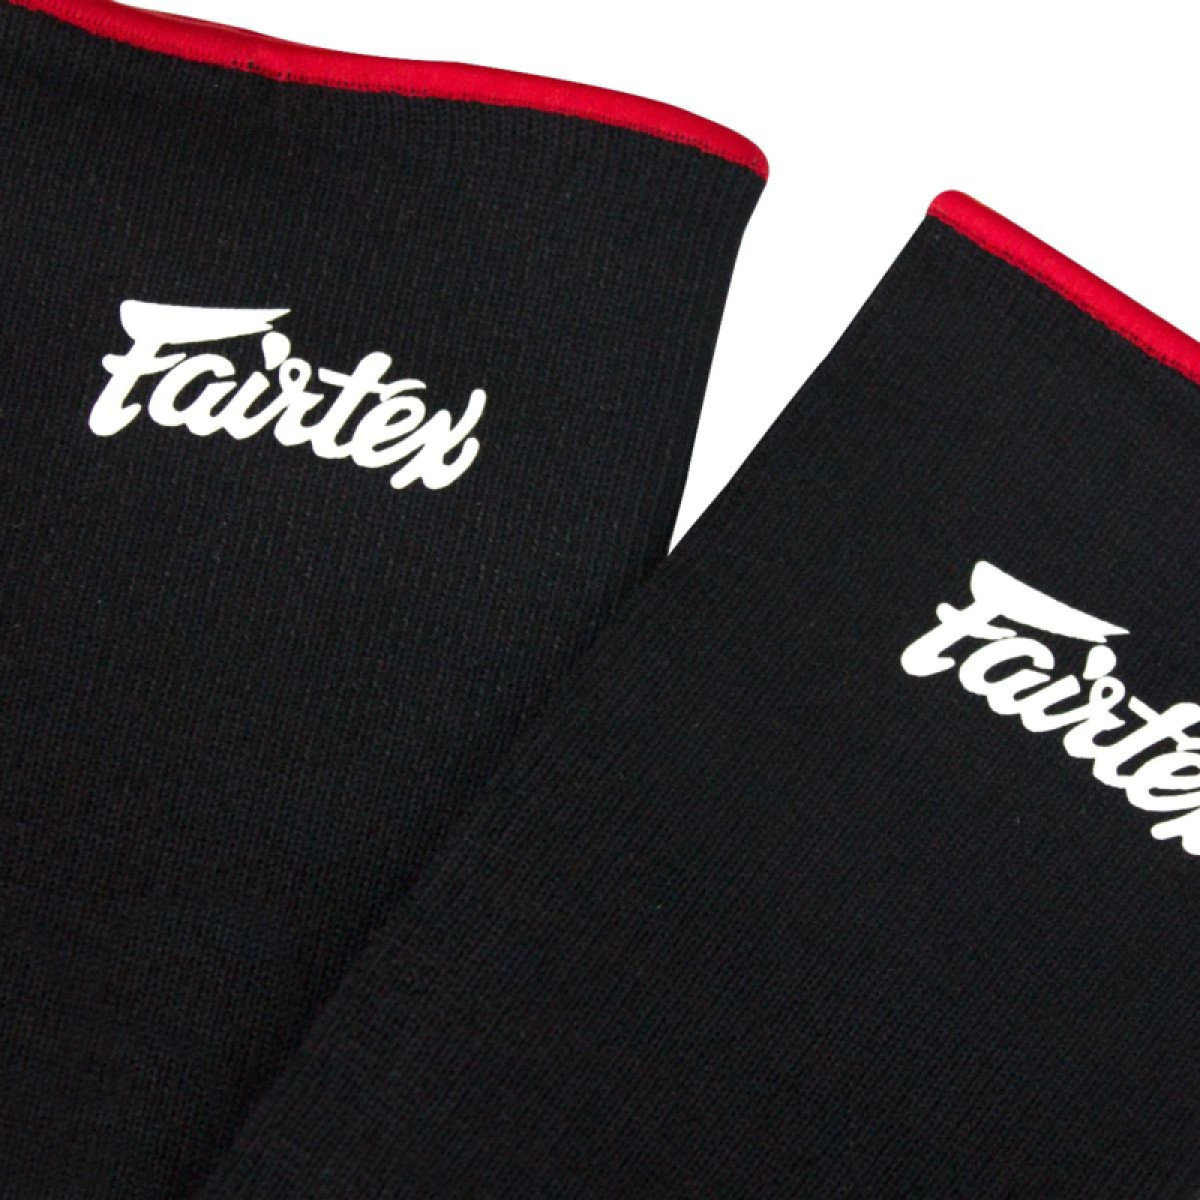 Fairtex Ankle Support - Red